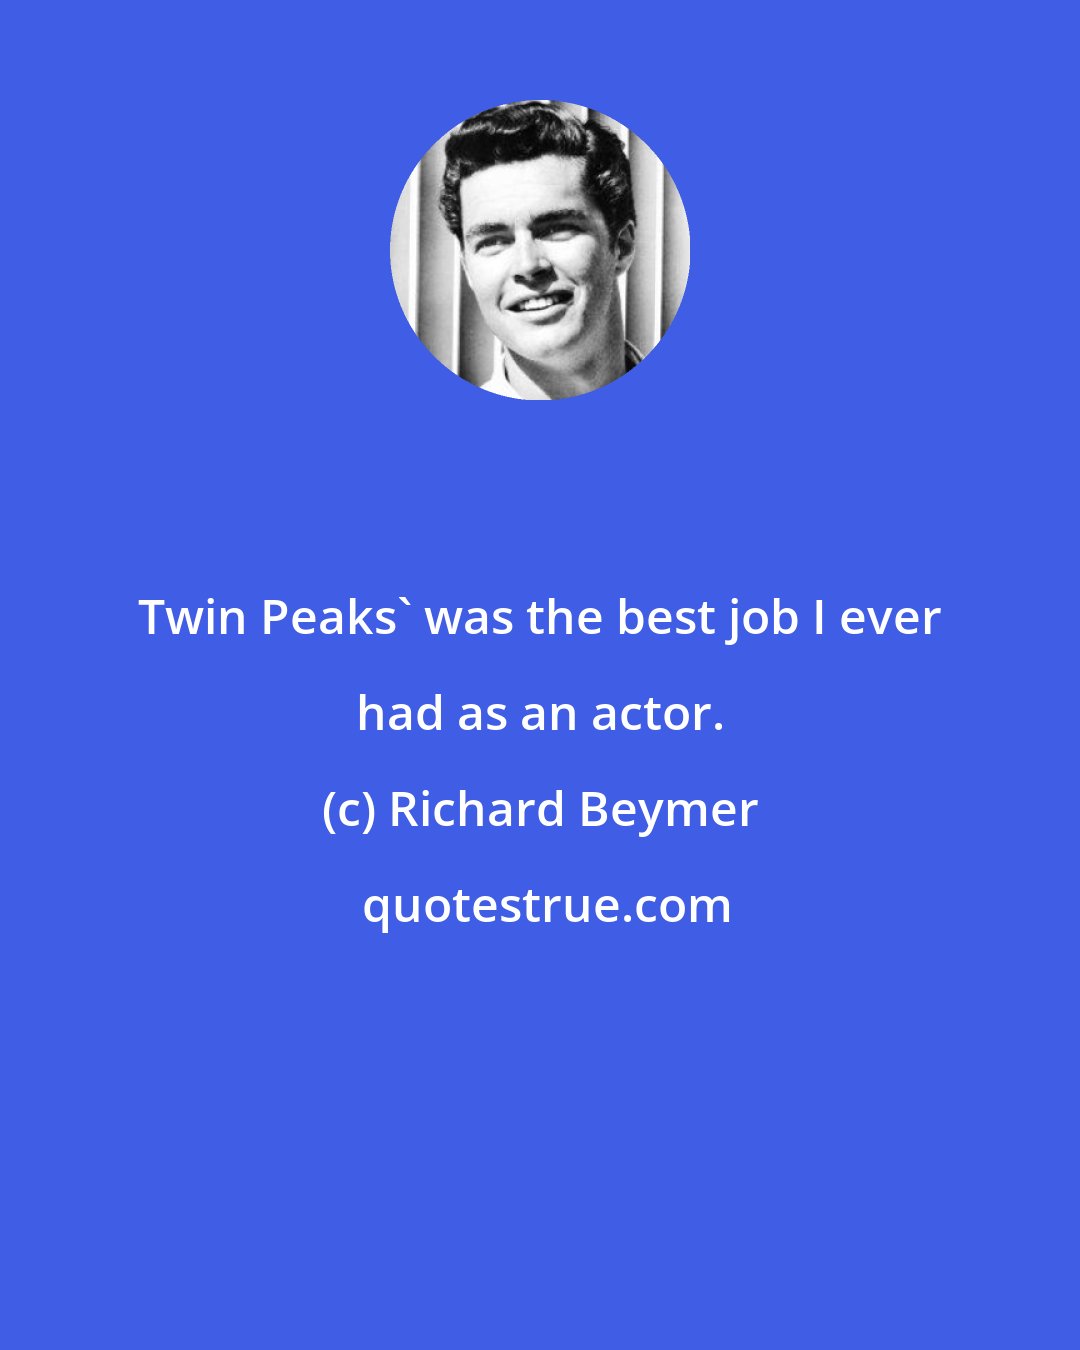 Richard Beymer: Twin Peaks' was the best job I ever had as an actor.